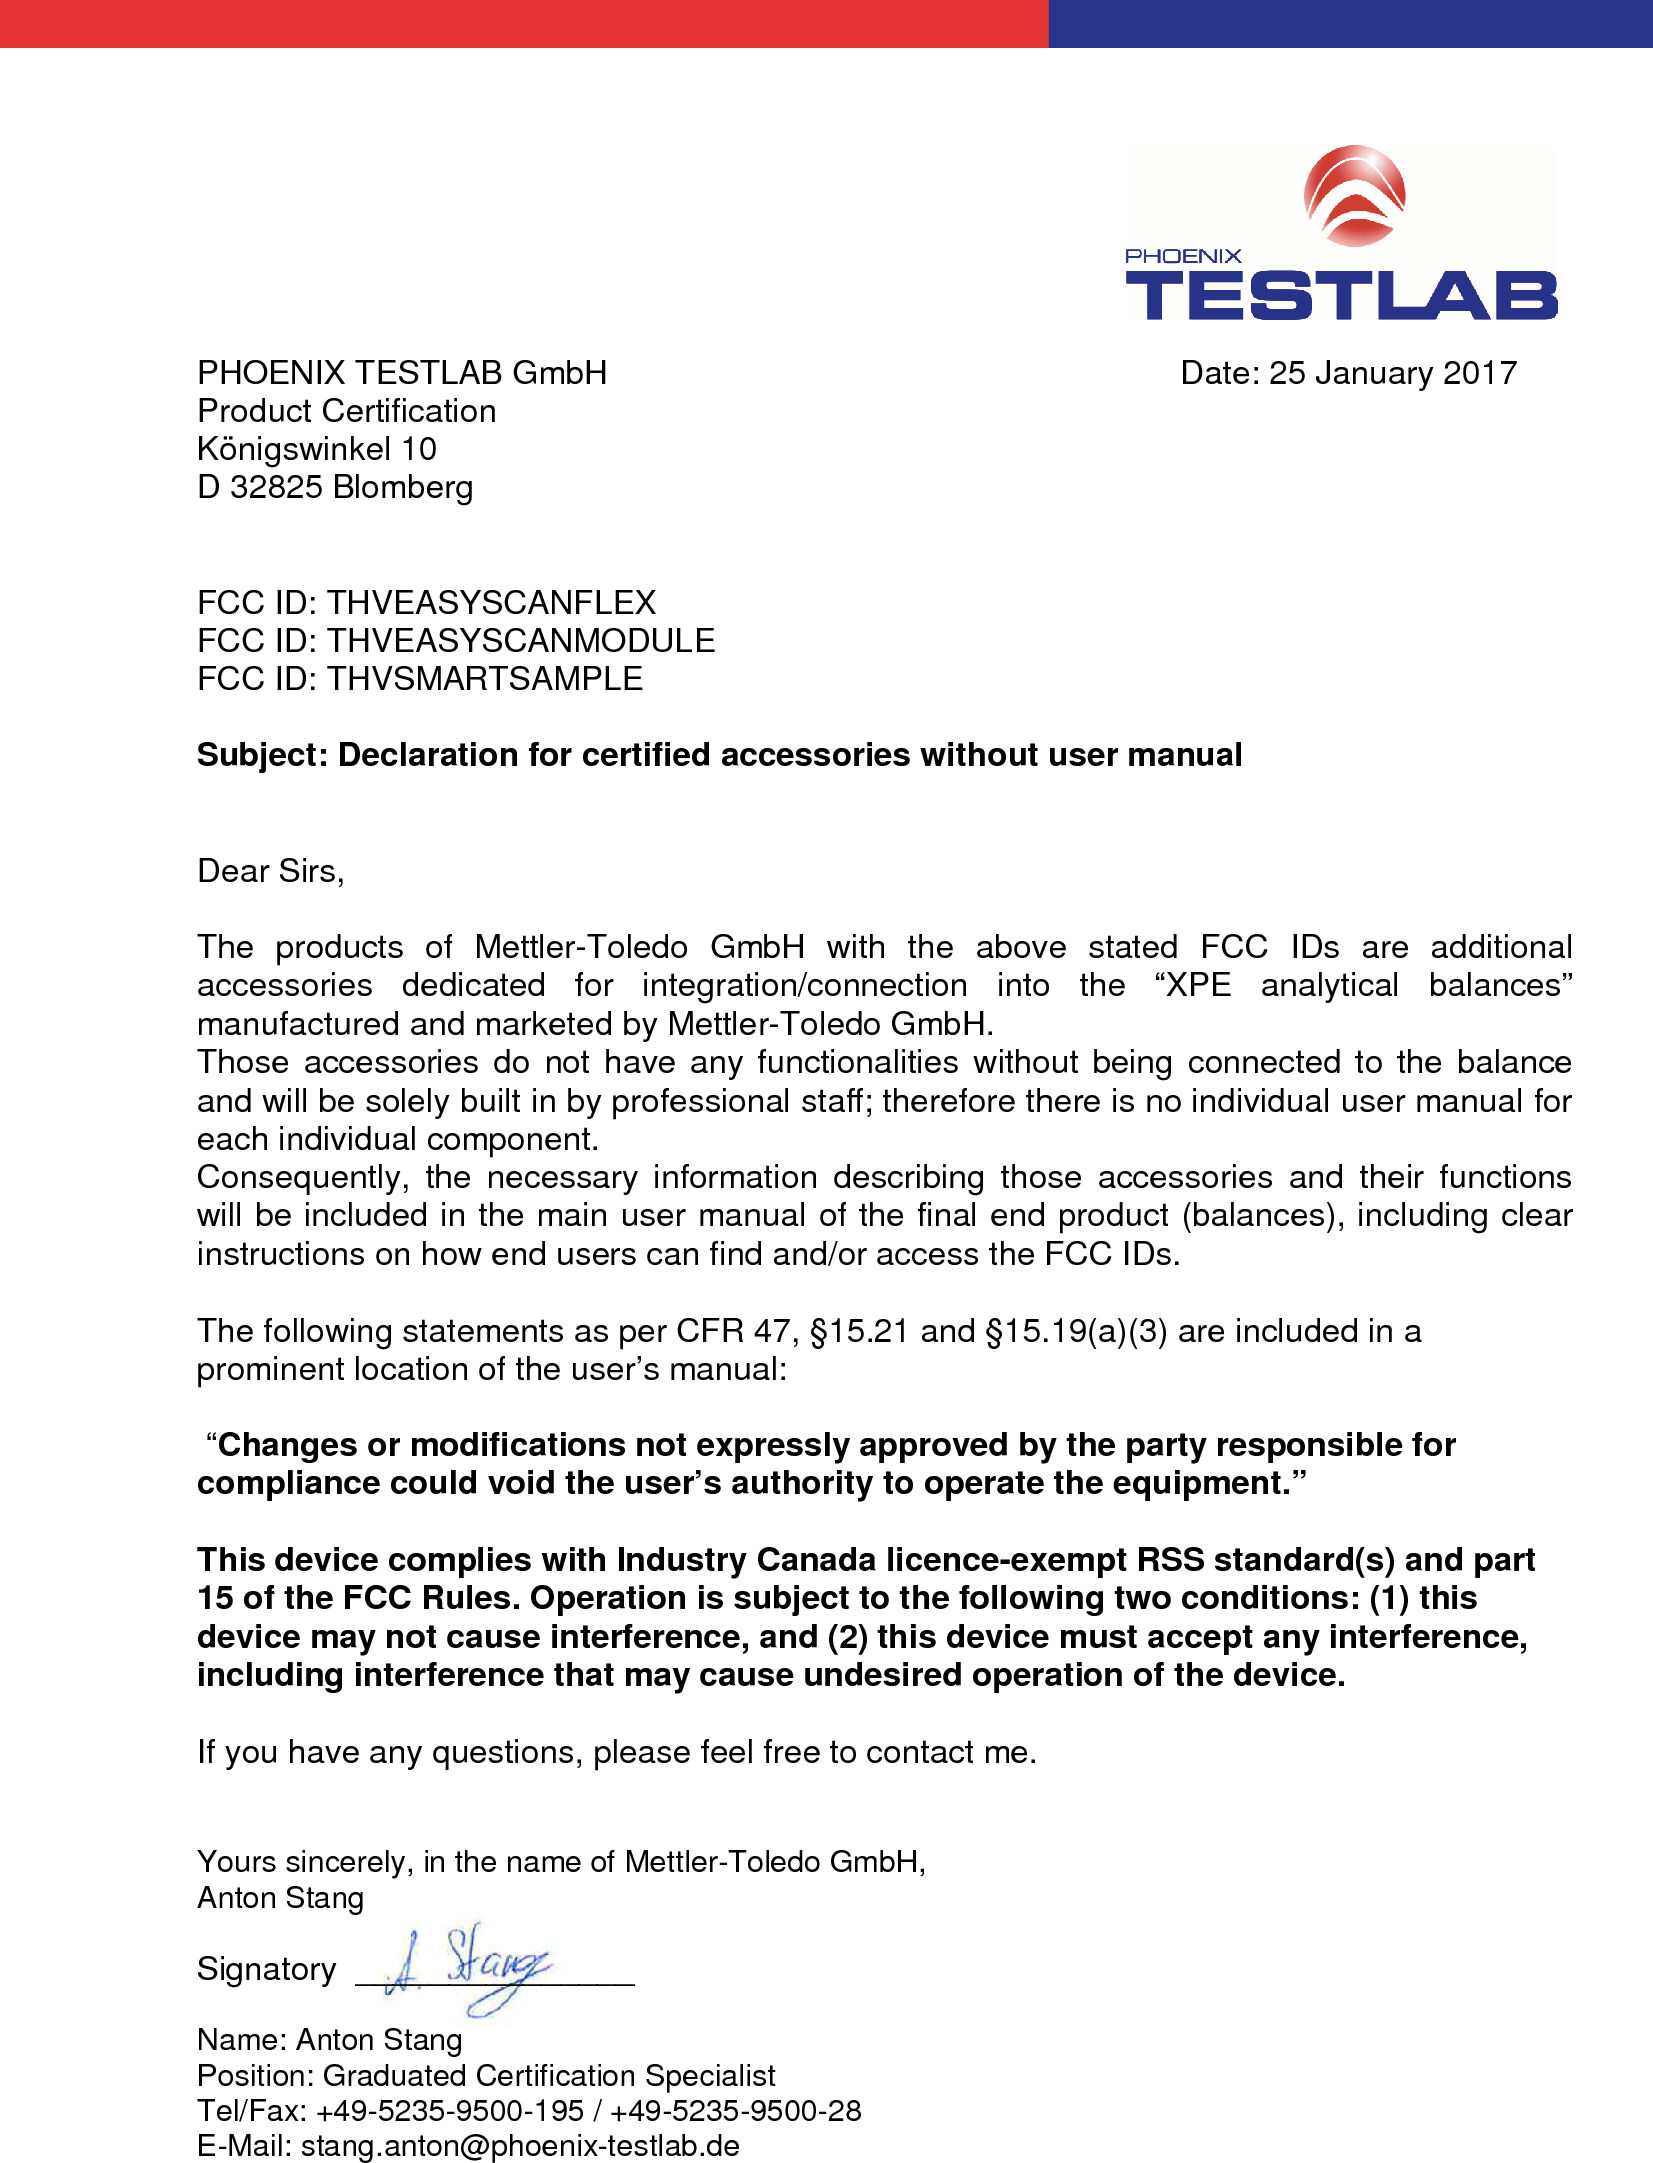 PHOENIX TESTLAB GmbH Date: 25 January 2017Product CertificationKönigswinkel 10D 32825 BlombergFCC ID: THVEASYSCANFLEXFCC ID: THVEASYSCANMODULEFCC ID: THVSMARTSAMPLESubject: Declaration for certified accessories without user manualDear Sirs,The products of Mettler-Toledo GmbH with the above stated FCC IDs are additionalaccessories dedicated for integration/connection into the “XPE analytical balances”manufactured and marketed by Mettler-Toledo GmbH.Those accessories do not have any functionalities without being connected to the balanceand will be solely built in by professional staff; therefore there is no individual user manual foreach individual component.Consequently, the necessary information describing those accessories and their functionswill be included in the main user manual of the final end product (balances), including clearinstructions on how end users can find and/or access the FCC IDs.The following statements as per CFR 47, §15.21 and §15.19(a)(3) are included in aprominent location of the user’s manual: “Changes or modifications not expressly approved by the party responsible forcompliance could void the user’s authority to operate the equipment.”This device complies with Industry Canada licence-exempt RSS standard(s) and part15 of the FCC Rules. Operation is subject to the following two conditions: (1) thisdevice may not cause interference, and (2) this device must accept any interference,including interference that may cause undesired operation of the device.If you have any questions, please feel free to contact me.Yours sincerely, in the name of Mettler-Toledo GmbH,Anton StangSignatory  _______________Name: Anton StangPosition: Graduated Certification SpecialistTel/Fax: +49-5235-9500-195 / +49-5235-9500-28E-Mail: stang.anton@phoenix-testlab.de